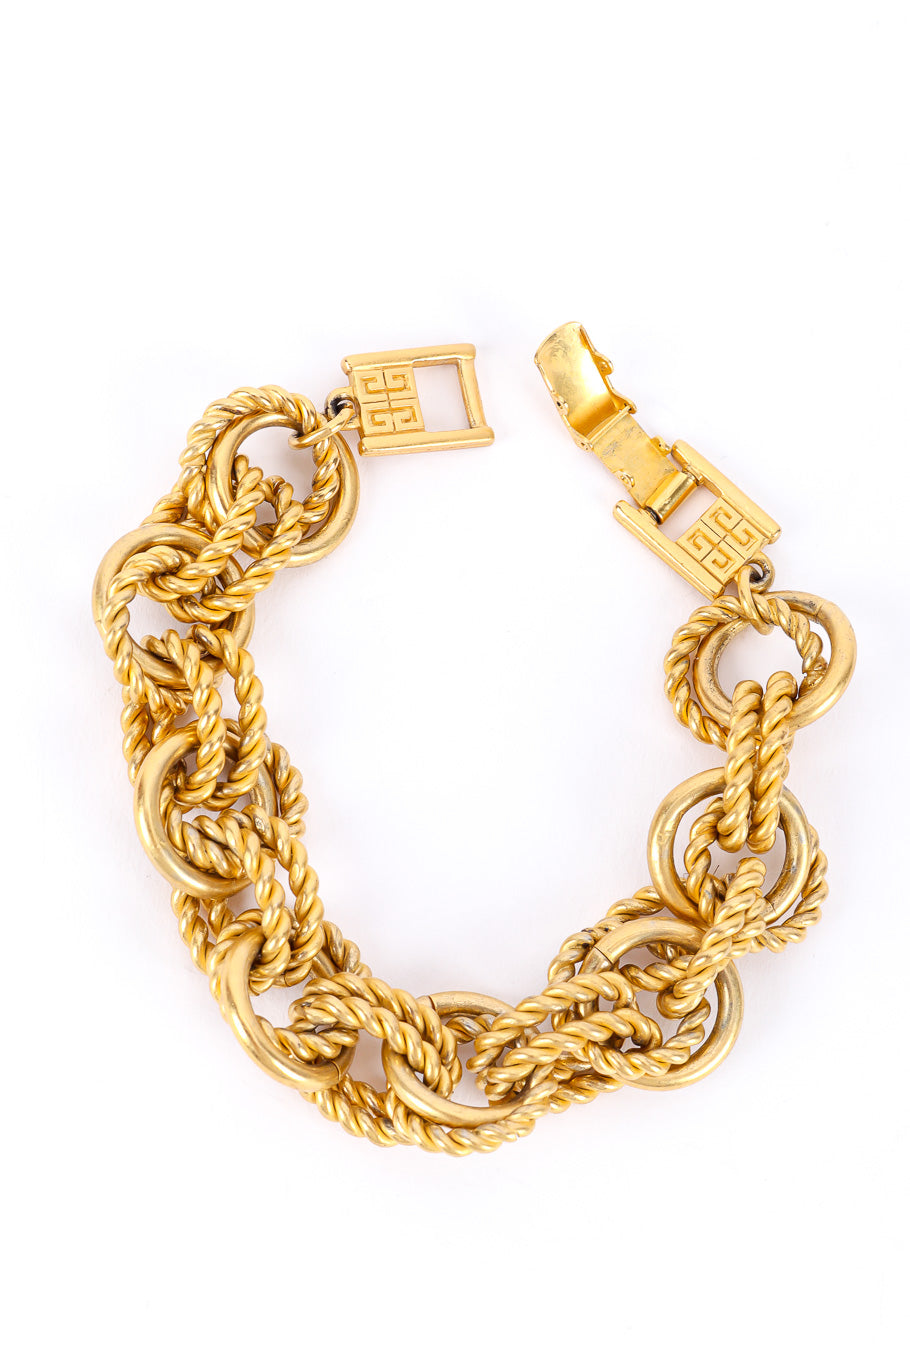 Vintage Givenchy Double Rope Chainlink Bracelet full view @Recessla 